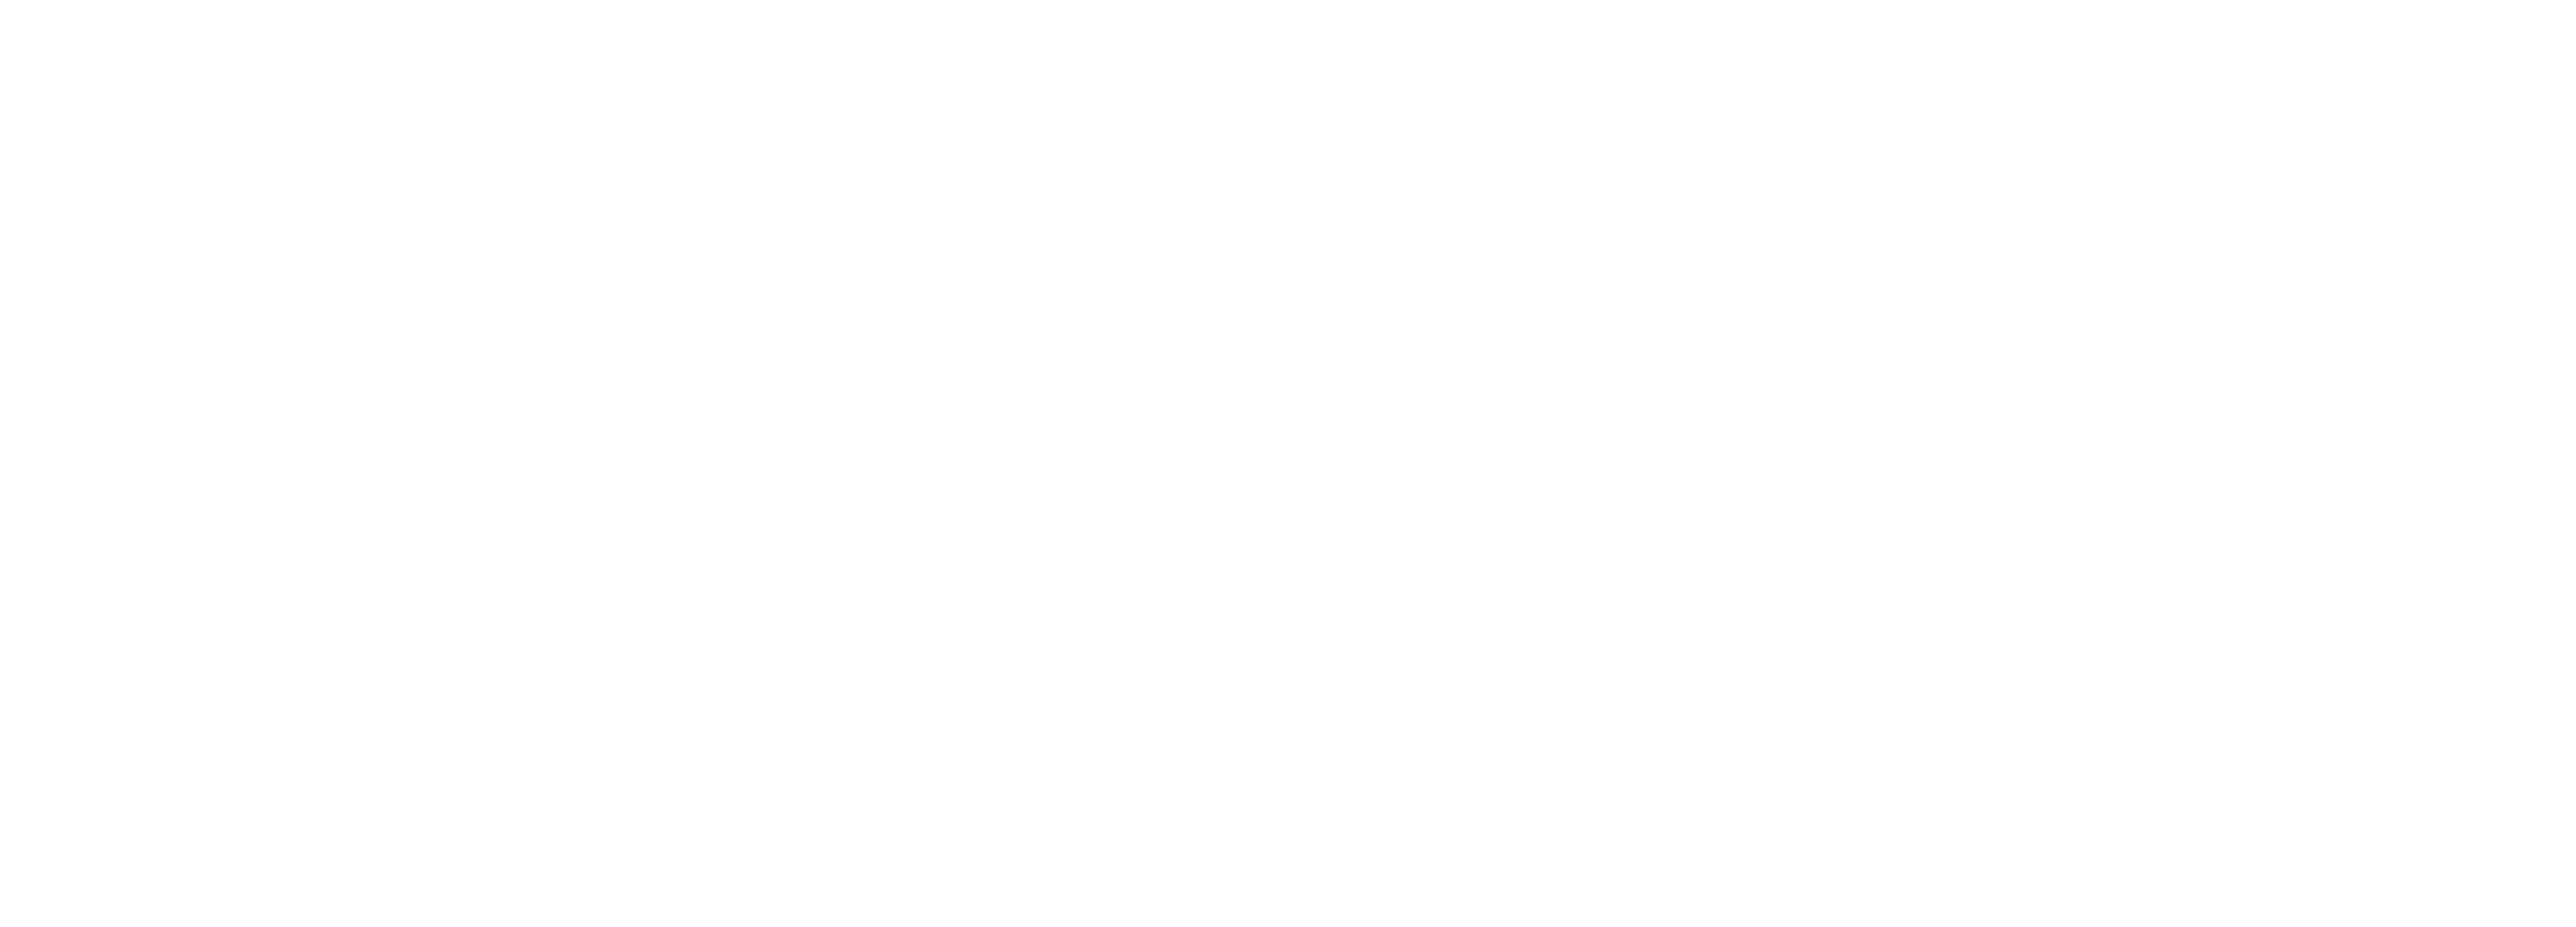 Filecoin Foundation for the Decentralized Web Logo